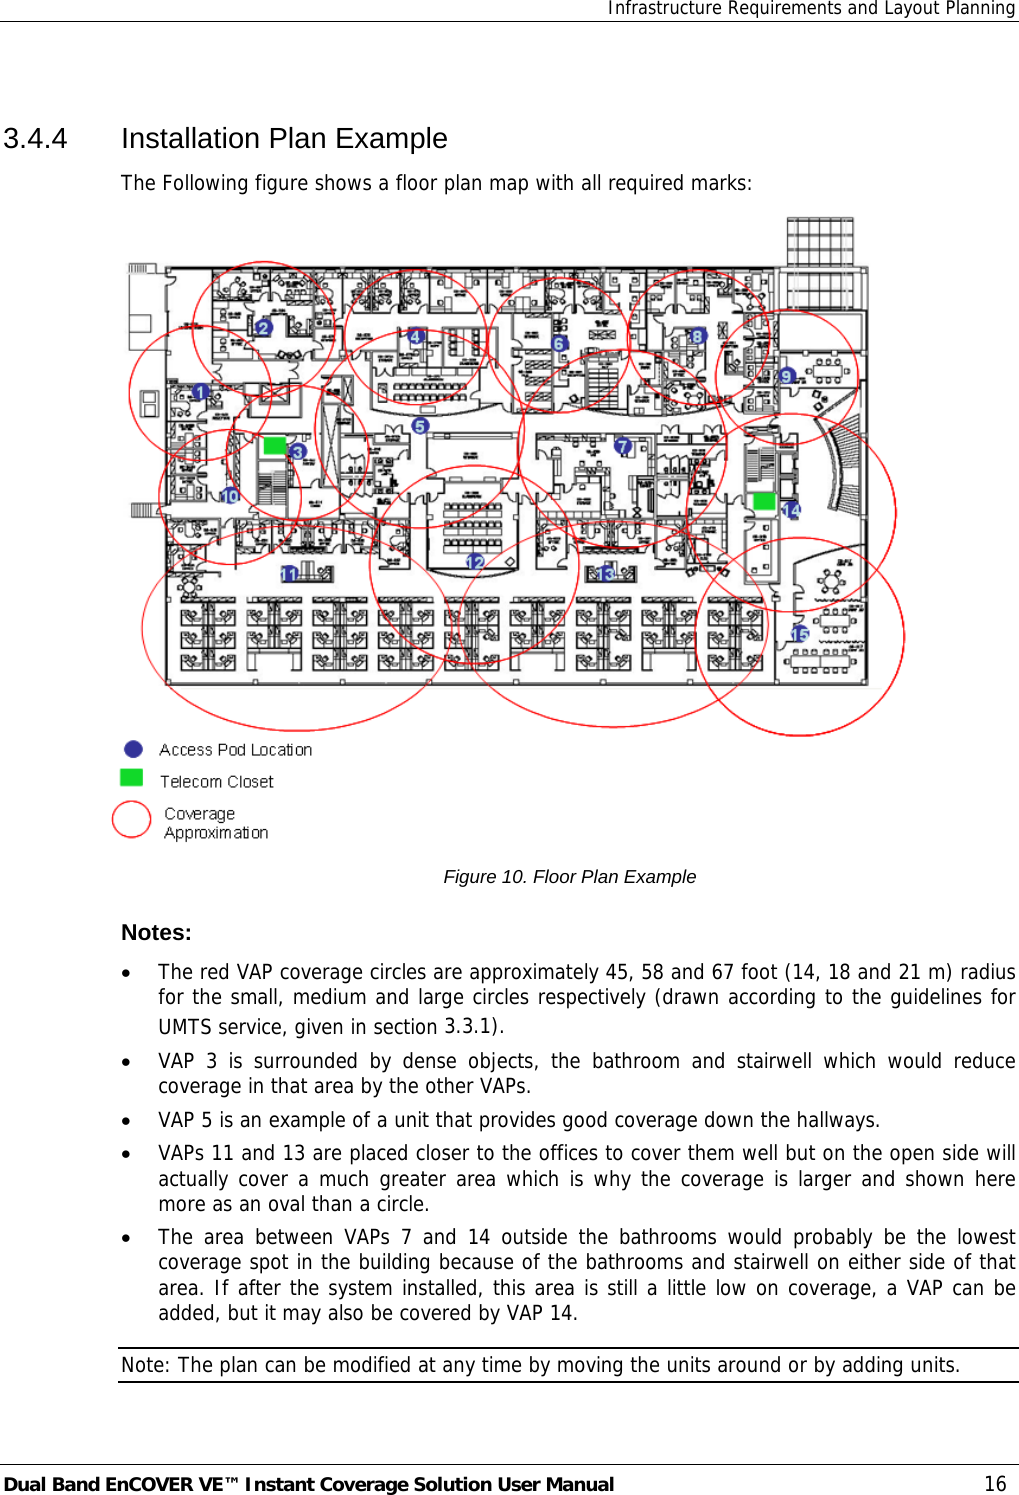 Infrastructure Requirements and Layout Planning Dual Band EnCOVER VE™ Instant Coverage Solution User Manual  16   3.4.4  Installation Plan Example The Following figure shows a floor plan map with all required marks:  Figure 10. Floor Plan Example Notes: • The red VAP coverage circles are approximately 45, 58 and 67 foot (14, 18 and 21 m) radius for the small, medium and large circles respectively (drawn according to the guidelines for UMTS service, given in section  3.3.1). • VAP 3 is surrounded by dense objects, the bathroom and stairwell which would reduce coverage in that area by the other VAPs. • VAP 5 is an example of a unit that provides good coverage down the hallways. • VAPs 11 and 13 are placed closer to the offices to cover them well but on the open side will actually cover a much greater area which is why the coverage is larger and shown here more as an oval than a circle. • The area between VAPs 7 and 14 outside the bathrooms would probably be the lowest coverage spot in the building because of the bathrooms and stairwell on either side of that area. If after the system installed, this area is still a little low on coverage, a VAP can be added, but it may also be covered by VAP 14. Note: The plan can be modified at any time by moving the units around or by adding units. 